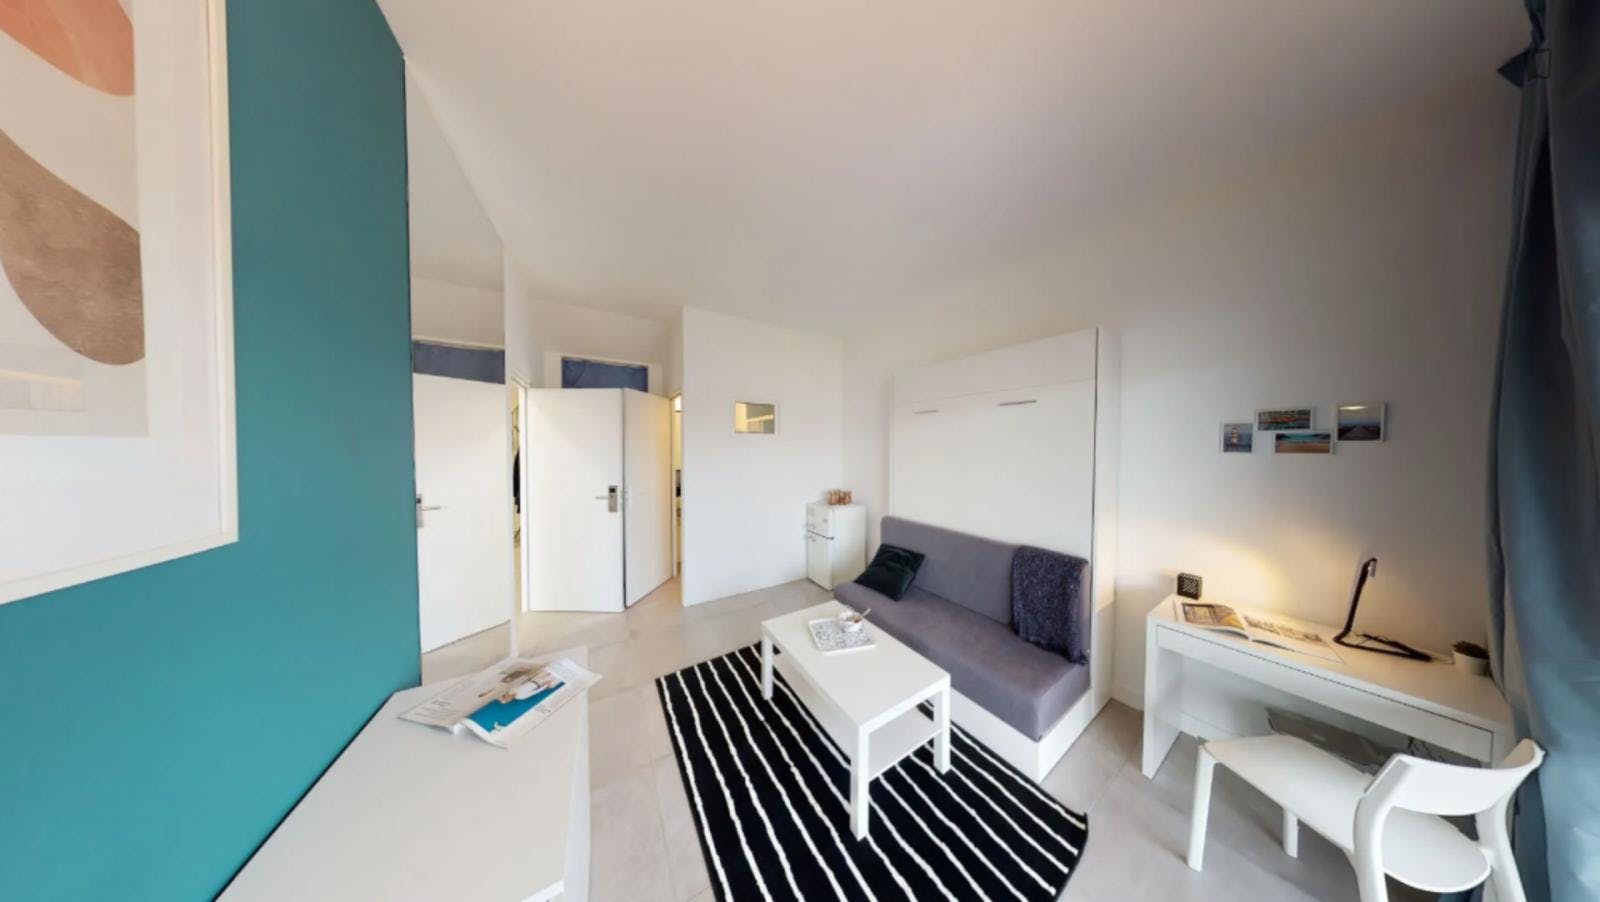 Comfy double ensuite bedroom in a 16-bedroom apartment not far from Bernard Magrez Cultural Institute